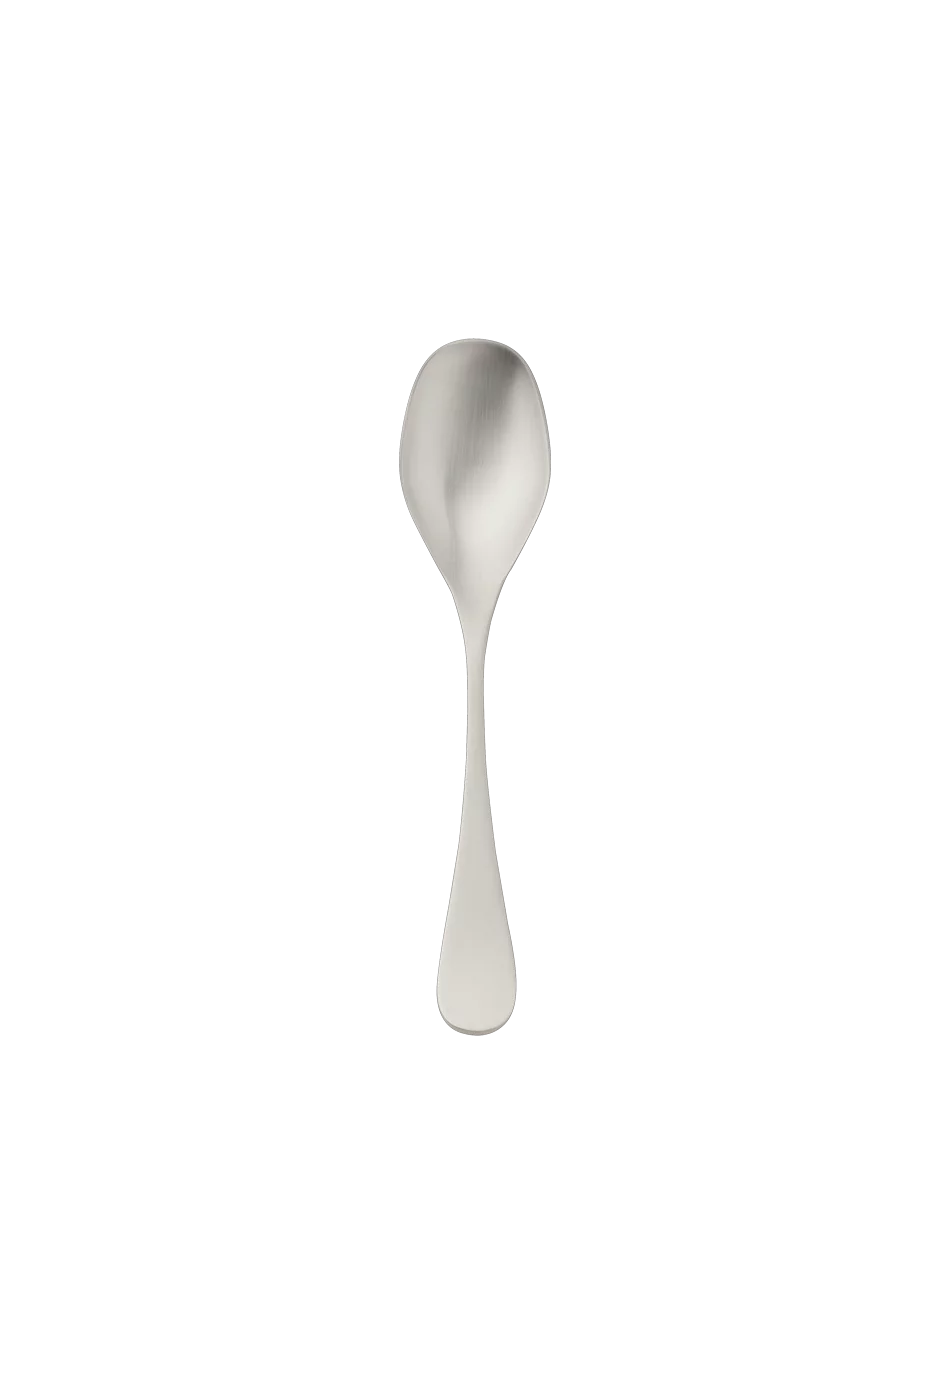 Scandia Coffee Spoon 14,5 Cm (18/8 stainless steel)